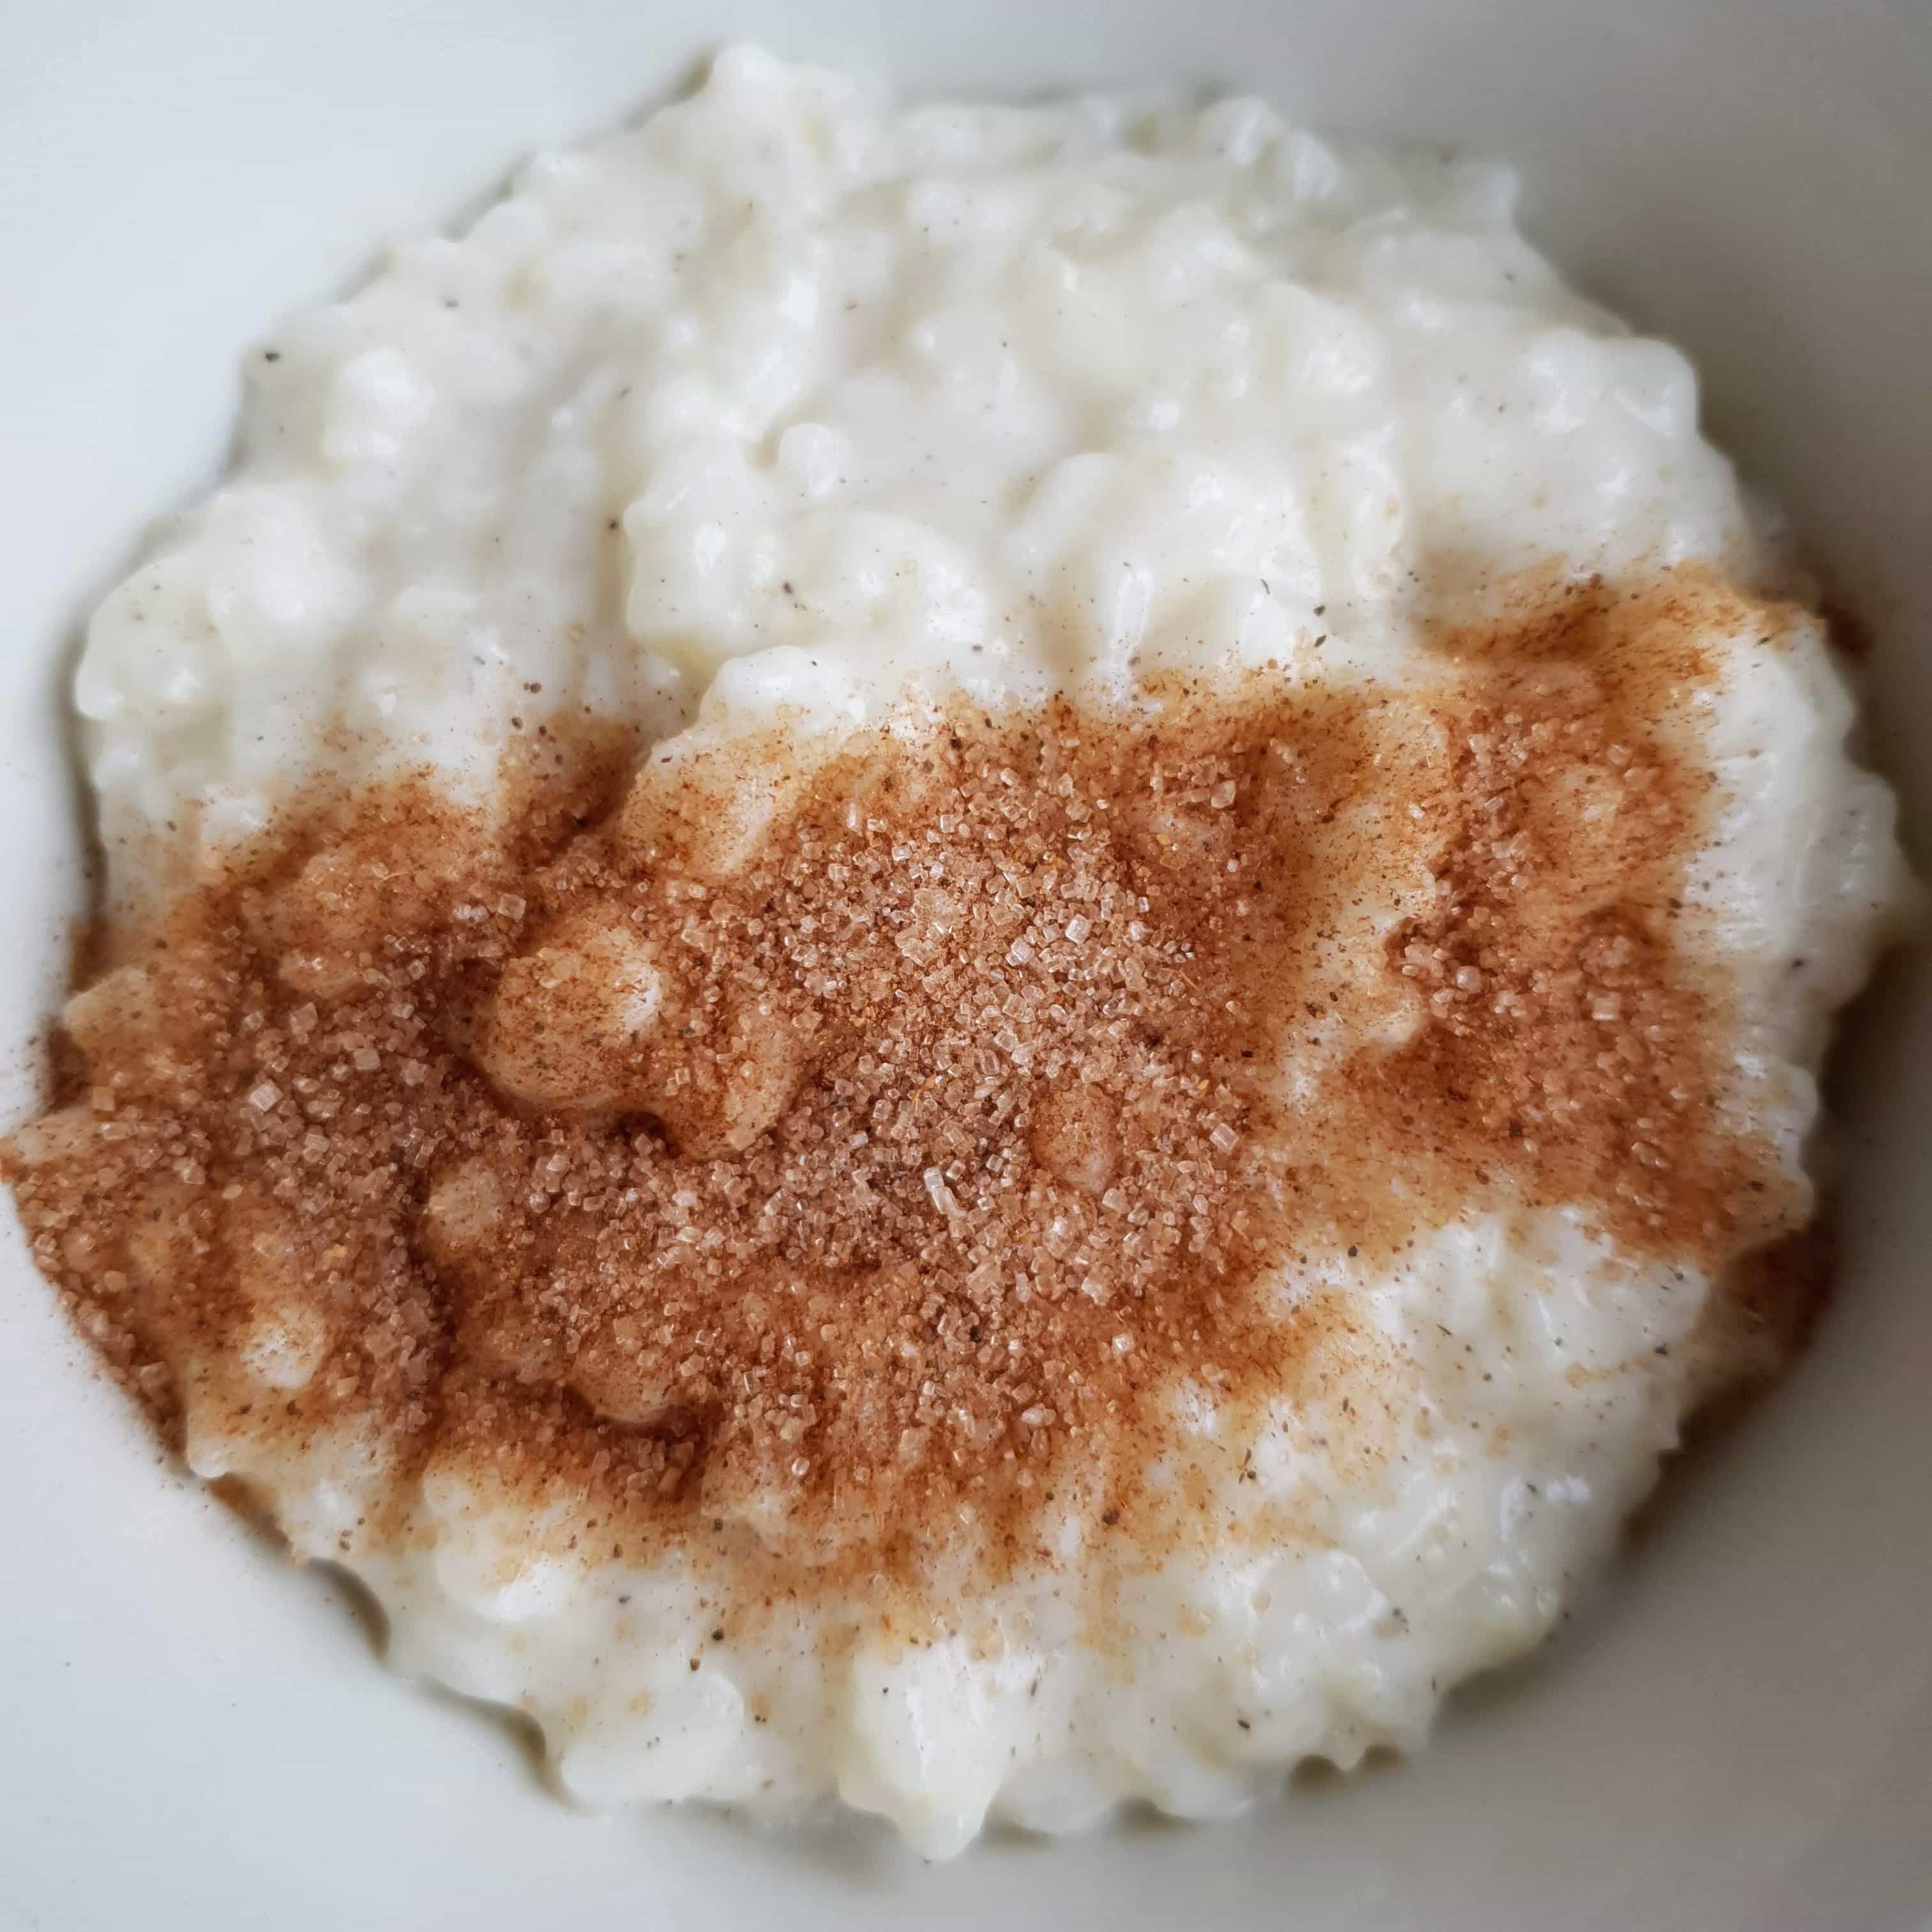 Rice porridge - how to make Danish rice porridge easily in the microwave. Make a delicious rice porridge, eat it for breakfast or dinner, or use it in rice puddings or rice pancakes. Find recipes, free print, and inspiration @ danishthings.com